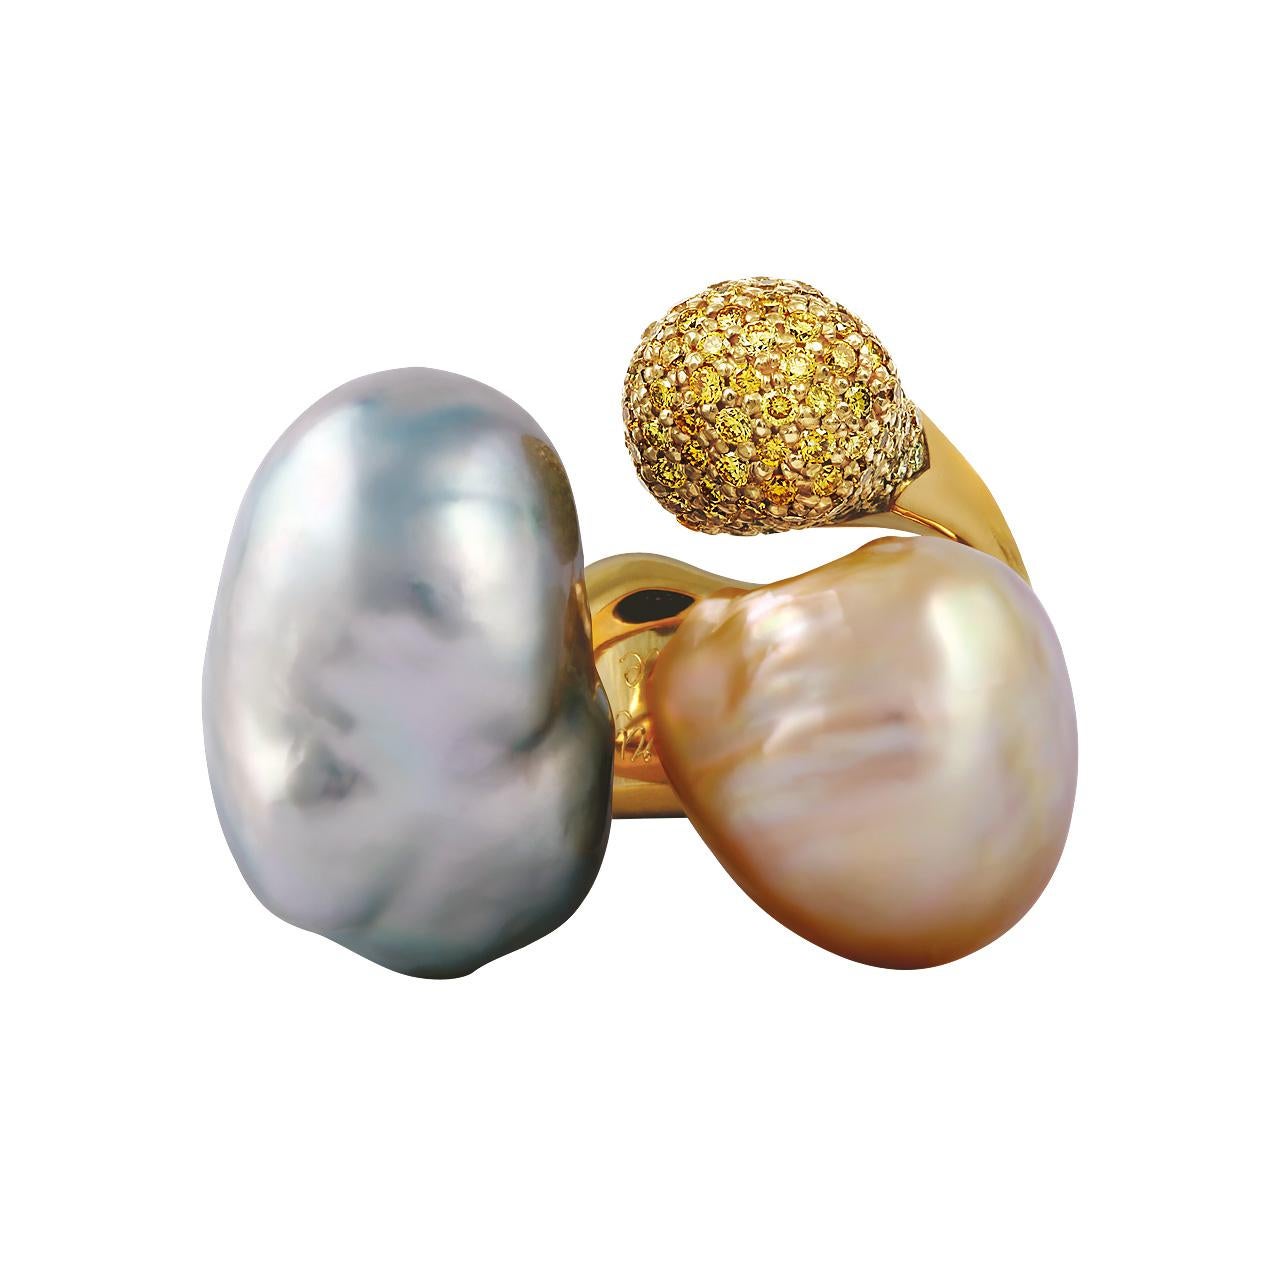 -218 Round Yellow Diamonds –1.494 ct, Z/SI3
- 27 Round Diamonds – 0.106 ct, G/VS1
- 18.3 mm White South Sea Baroque pearl
- 15.9 mm Pink South Sea Baroque pearl
- 18K Yellow Gold 
- Weight: 25.48 g
- Size: 17.5 mm
This spectacular ring from the